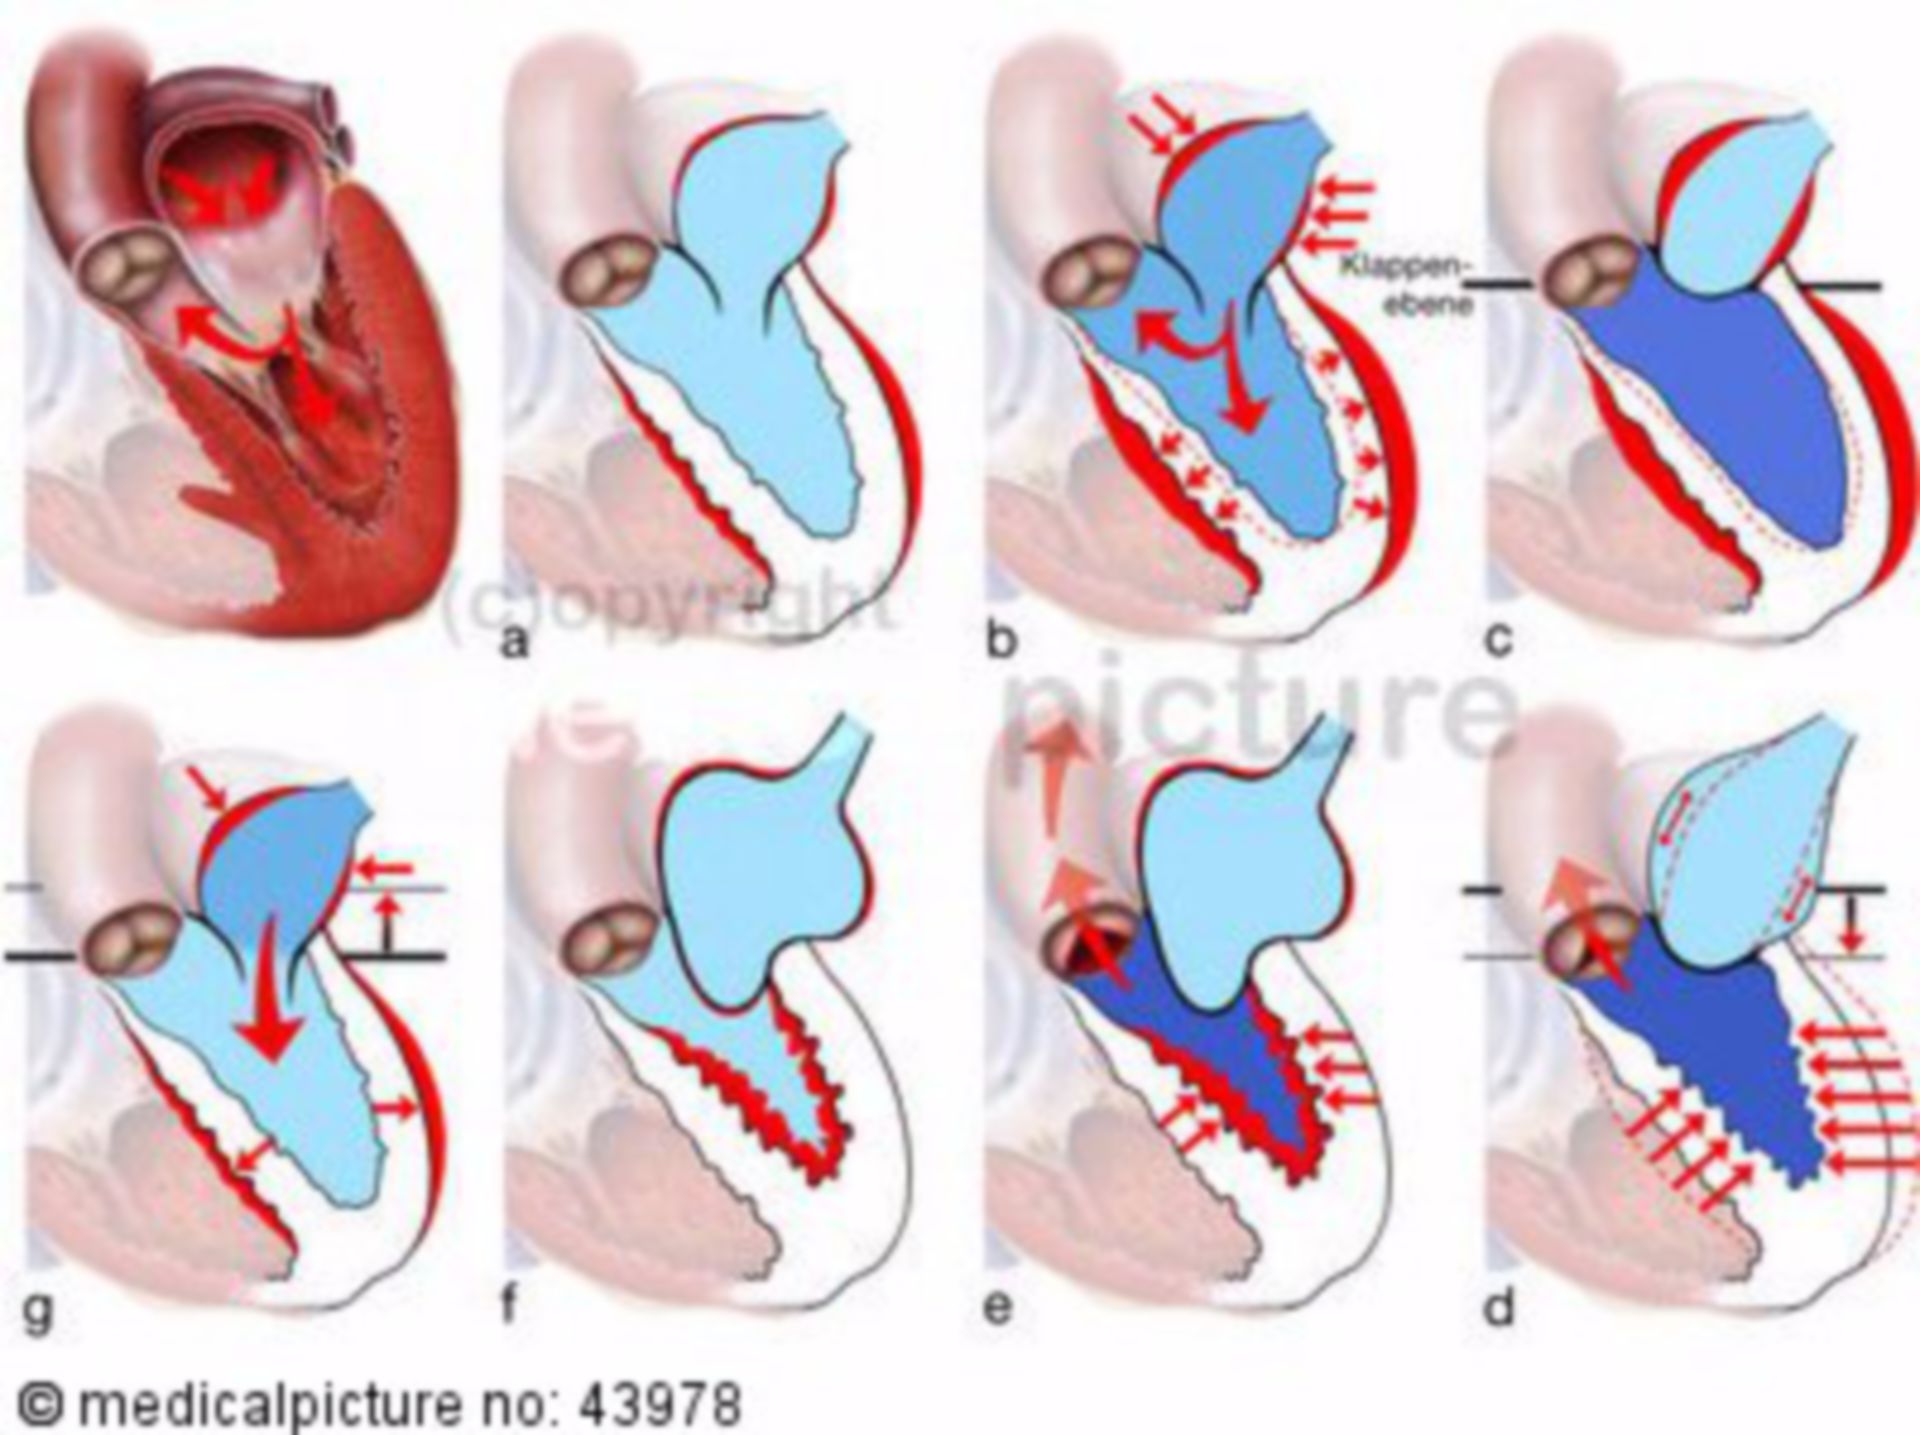 Contraction and pumping of the heart